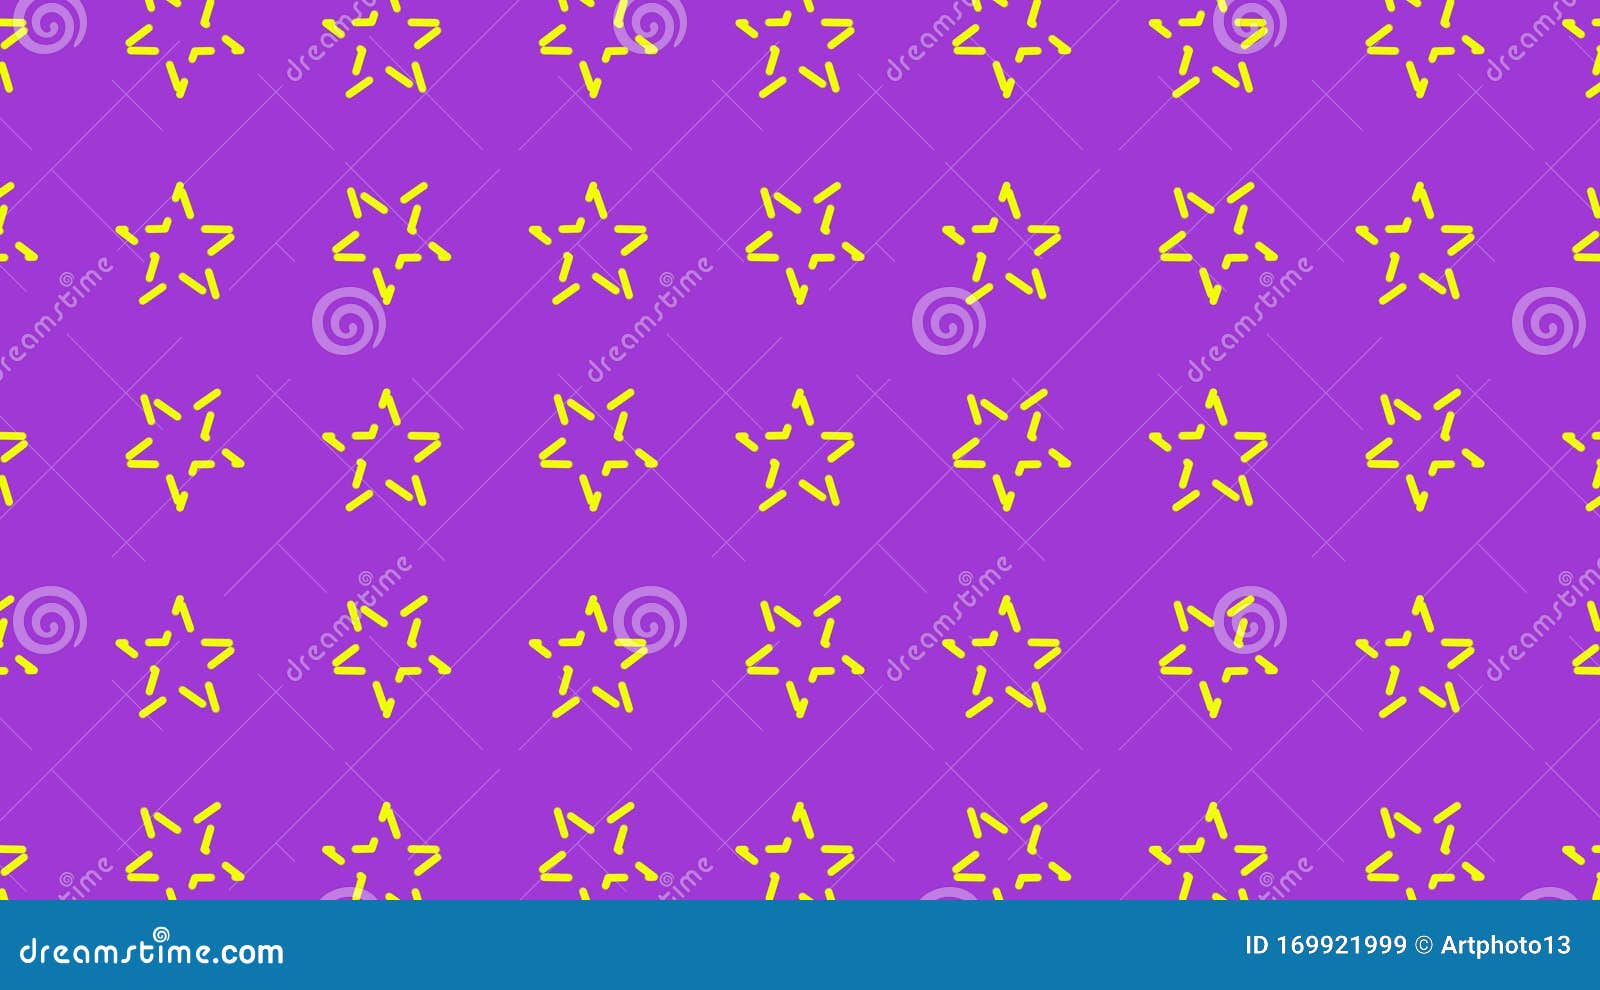 Animated 2d  Pattern Simple Loop Small Stars Spin on Pastel   Pattern with Star Shapers Stock Illustration -  Illustration of decorative, paper: 169921999